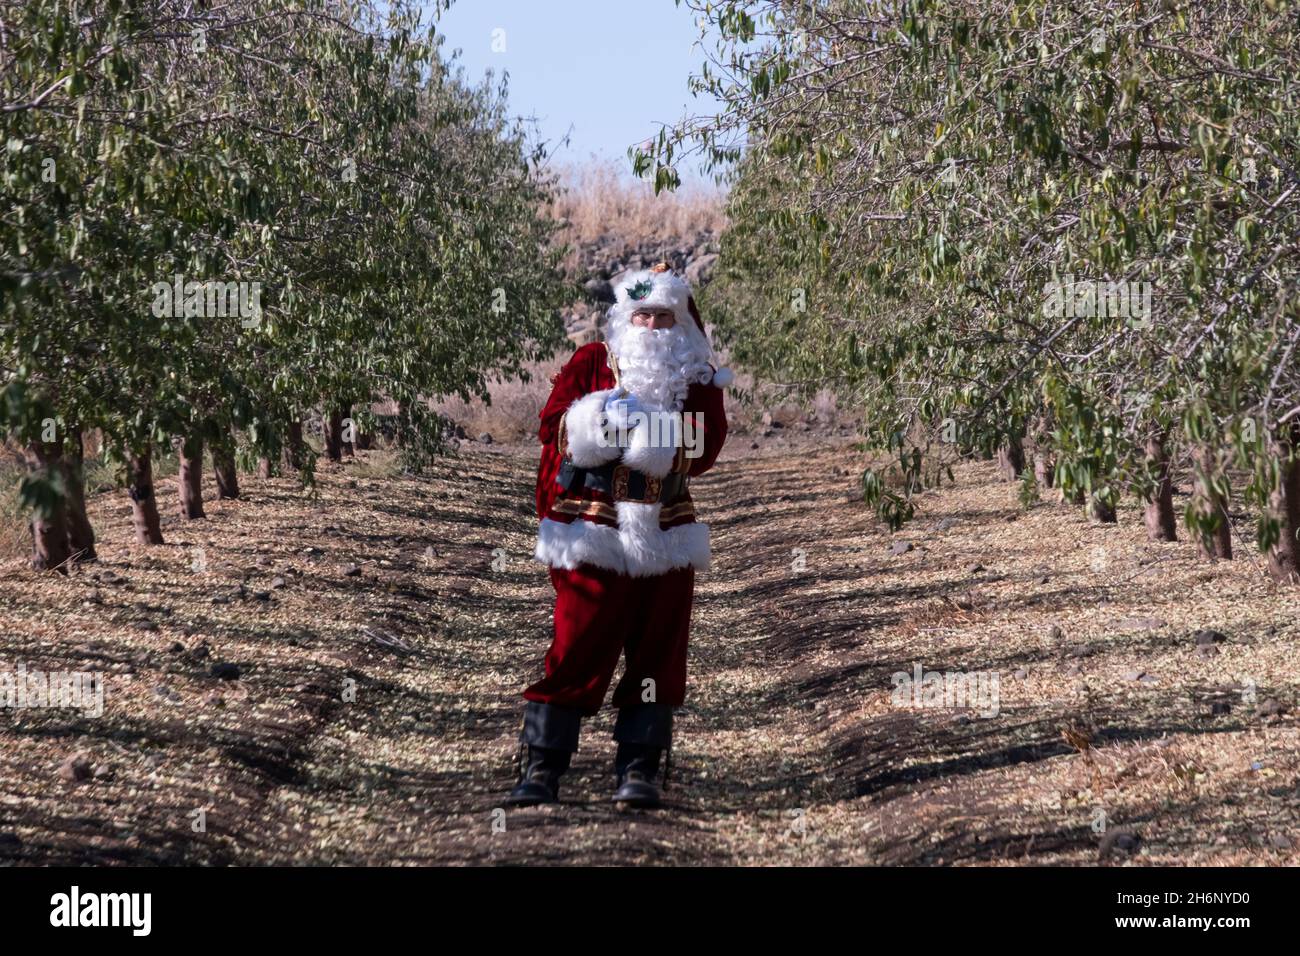 Issa Kassissieh, an Arab Orthodox Christian and Israel’s only certified Santa Claus, carries a bag of presents and walks through an orchard during the filming of a Christmas season advertisement for the Israeli ministry of tourism in the Golan Heights, Israel. Stock Photo